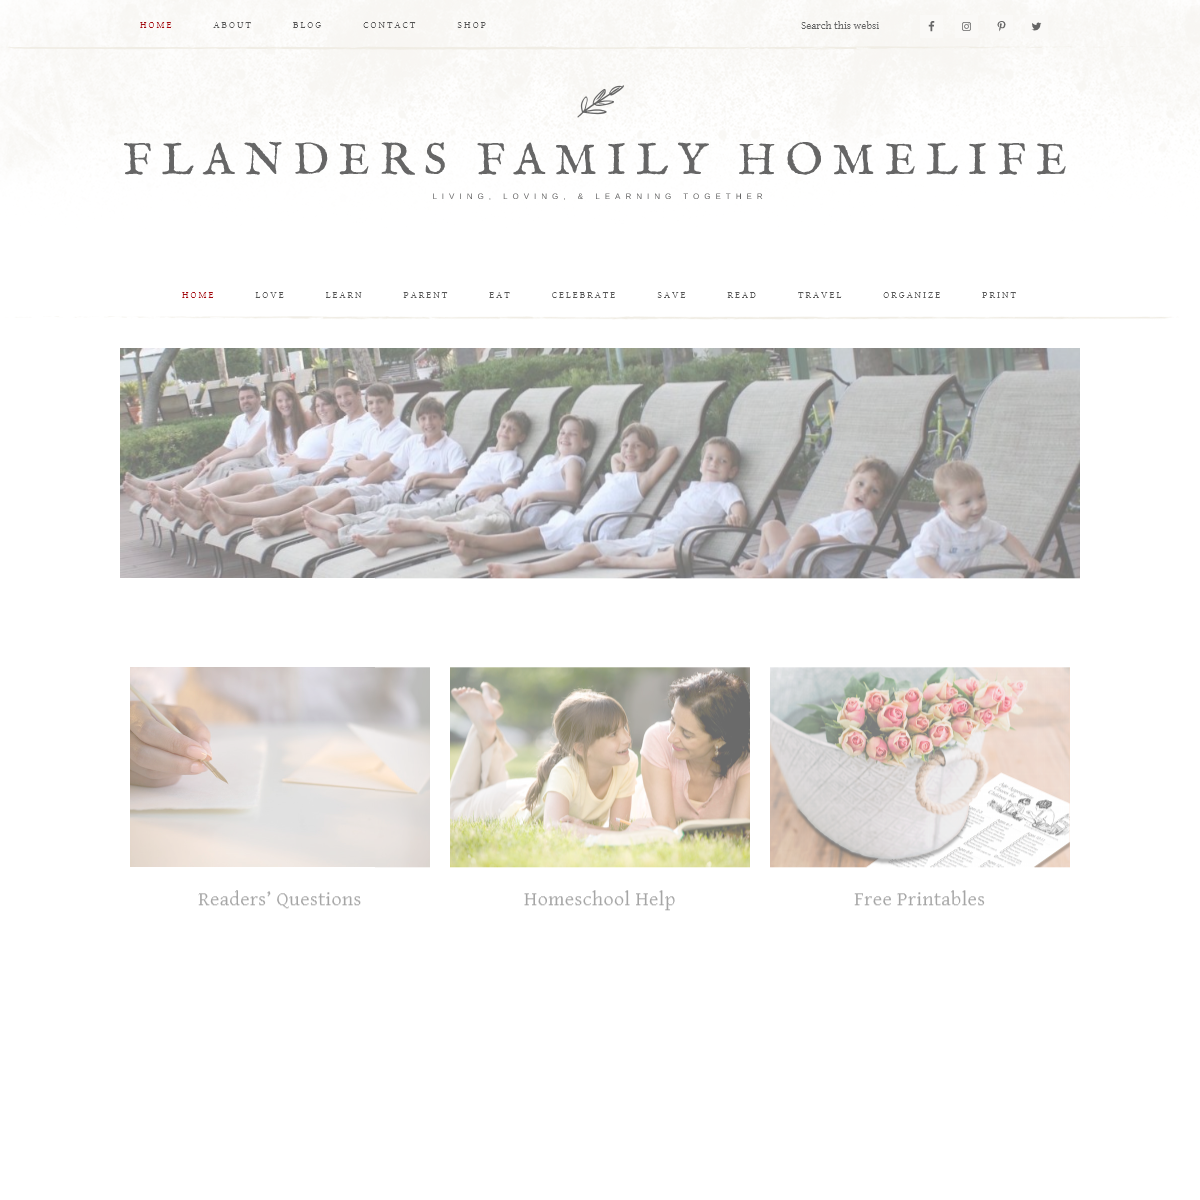 A complete backup of flandersfamily.info